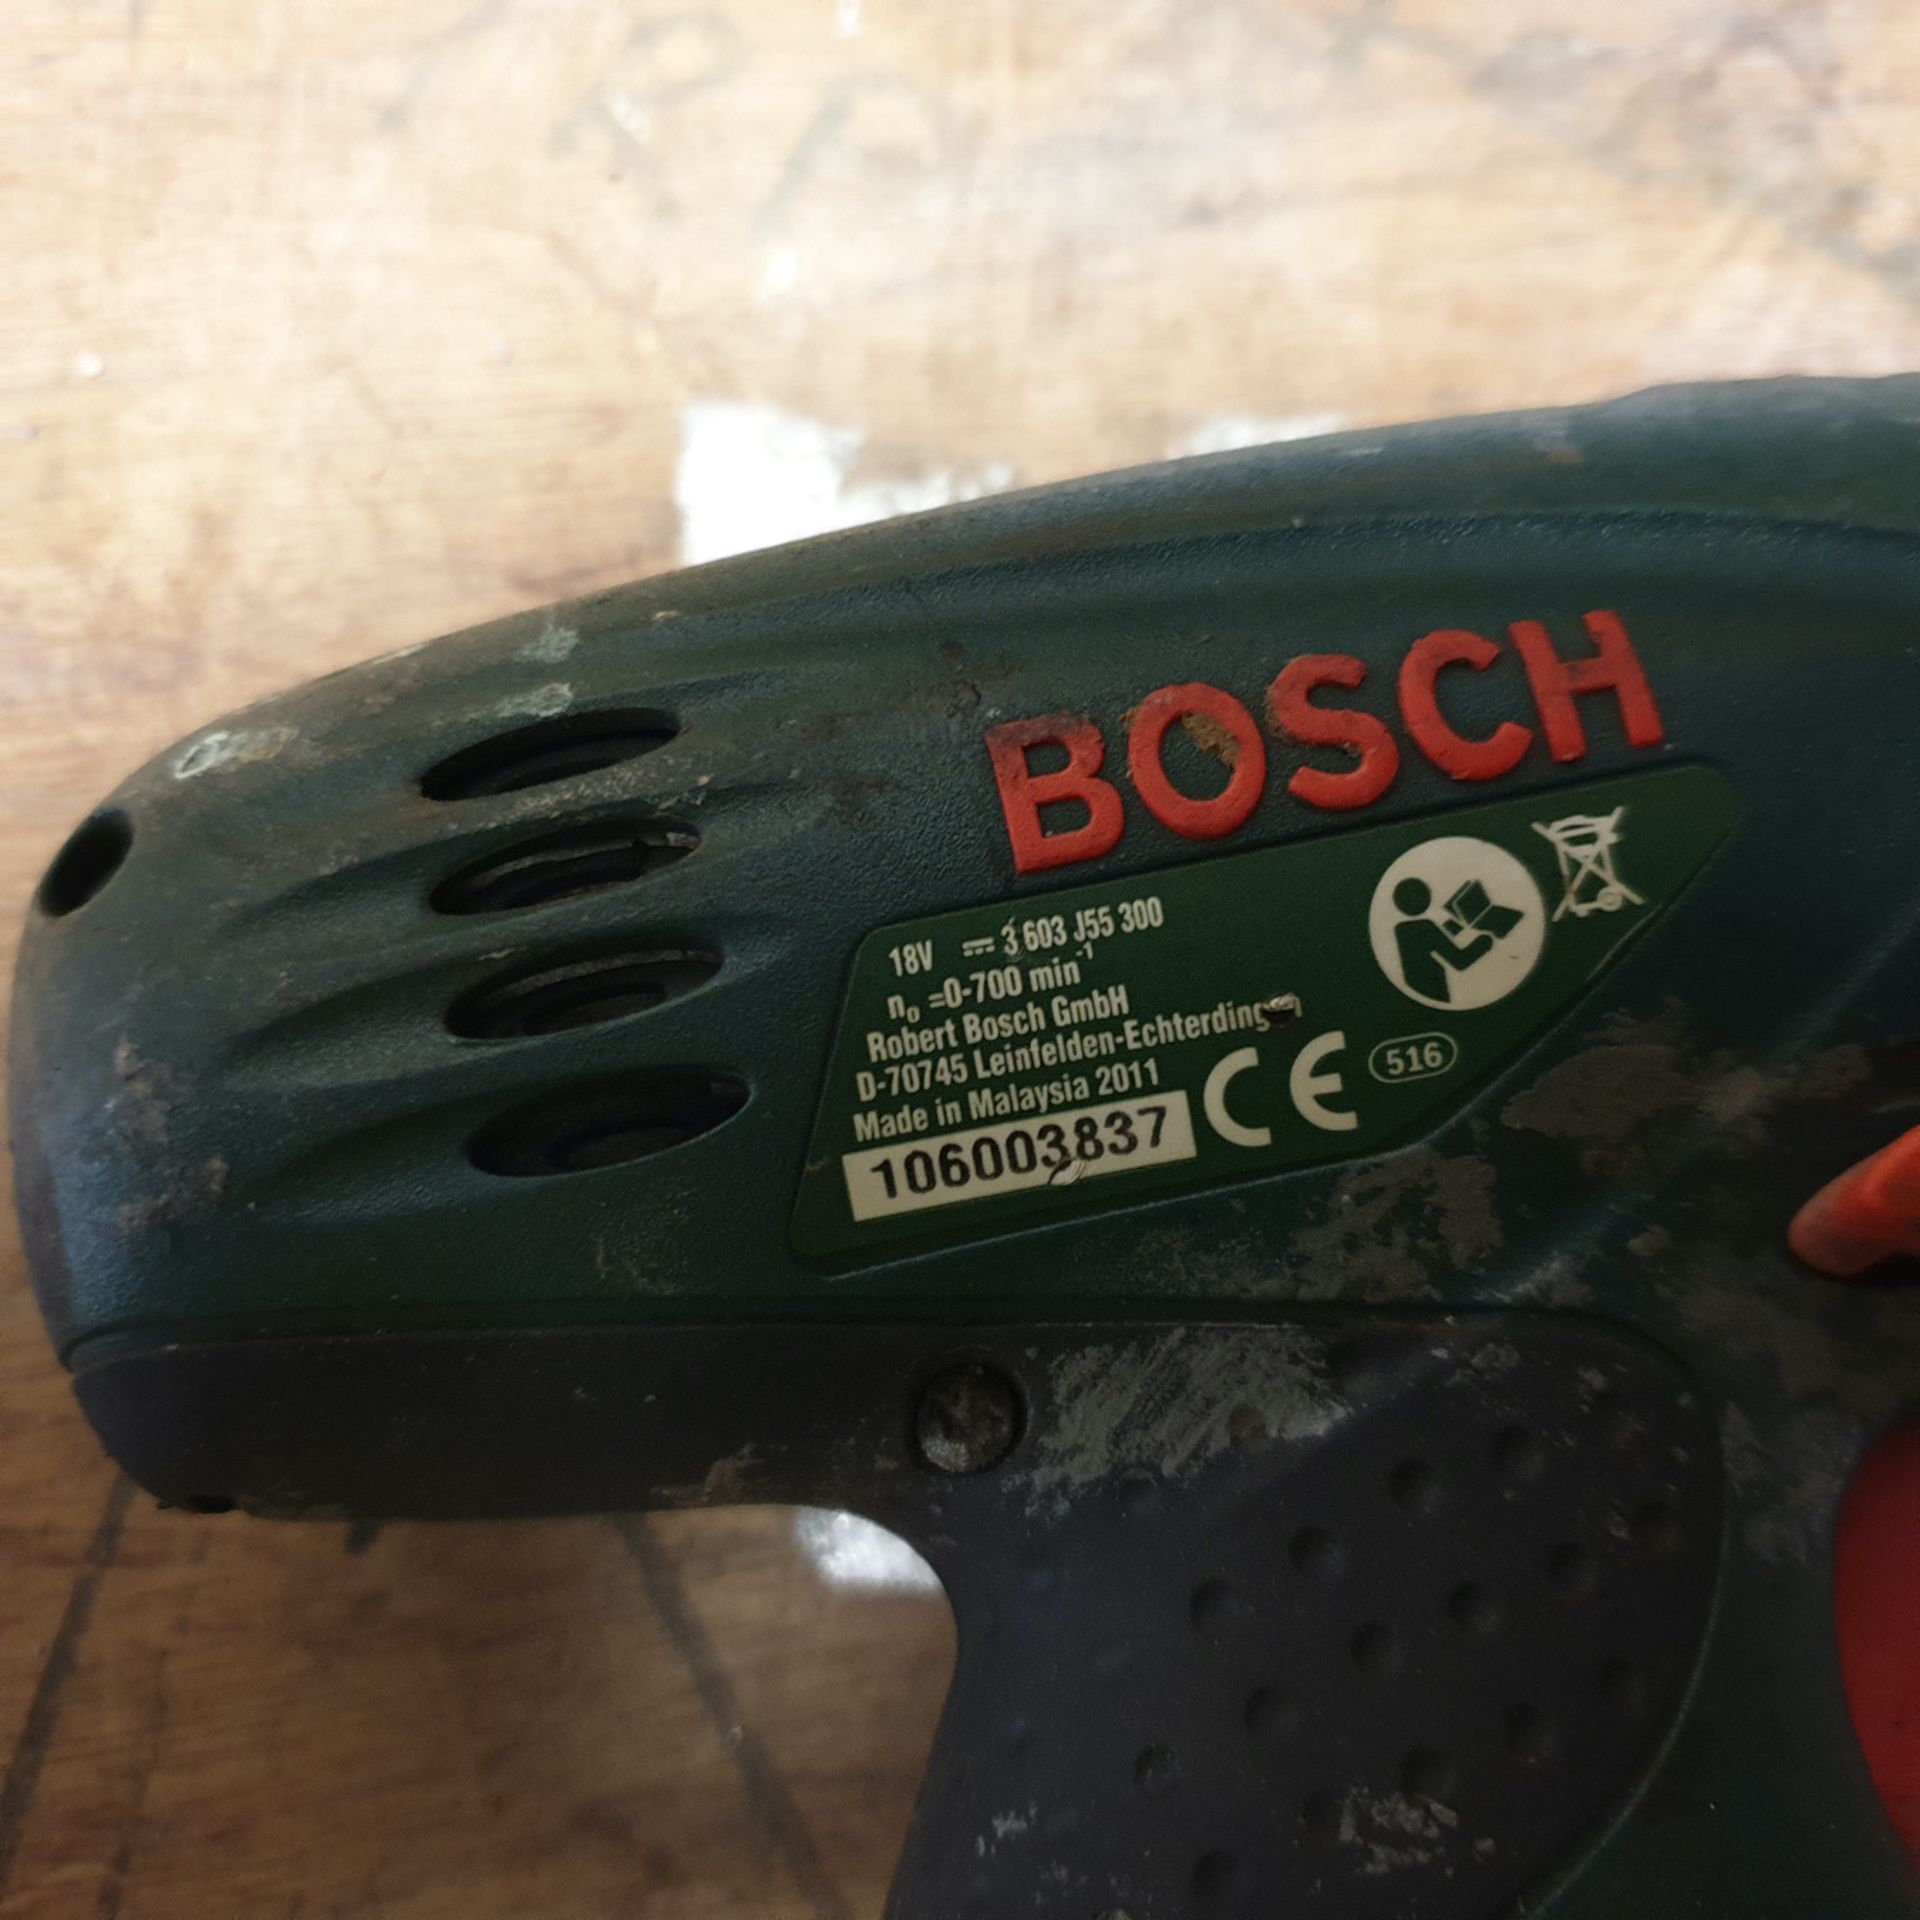 BOSCH Cordless Hand Drill with Spare Battery and Charger. Boxed. - Image 4 of 5